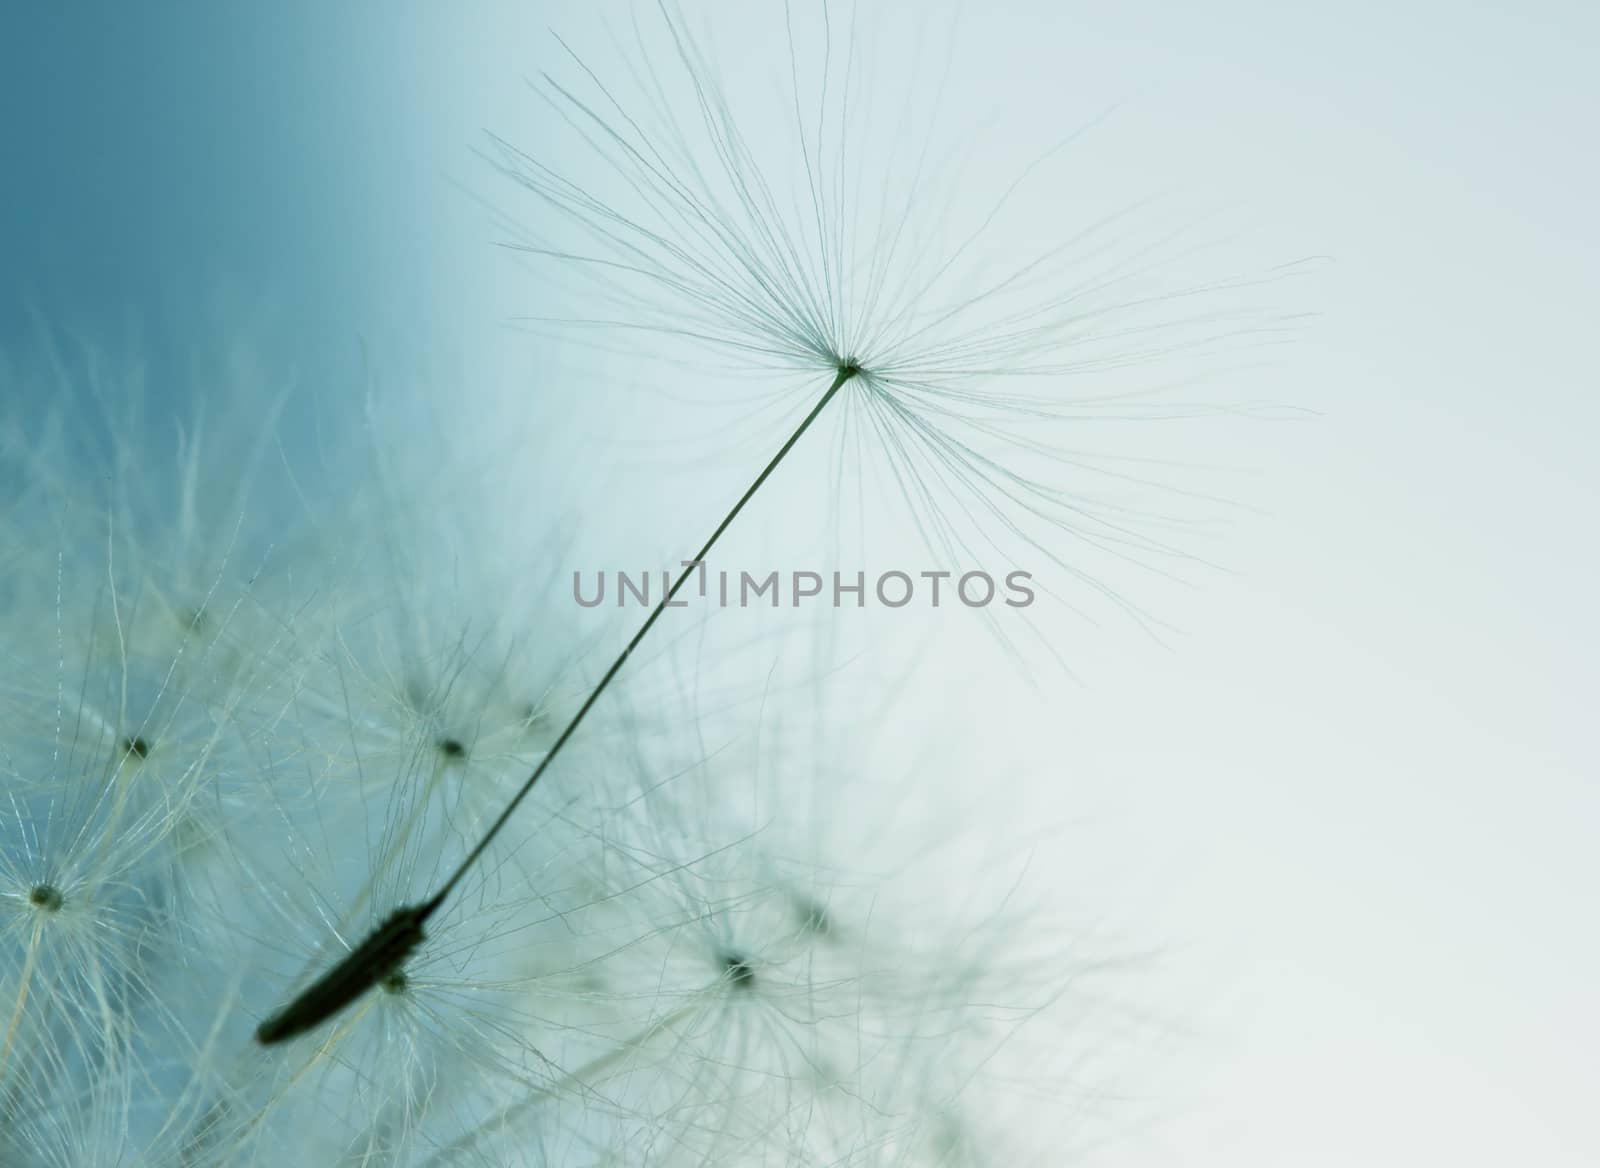 Extreme close up view of dandelion flower with seed